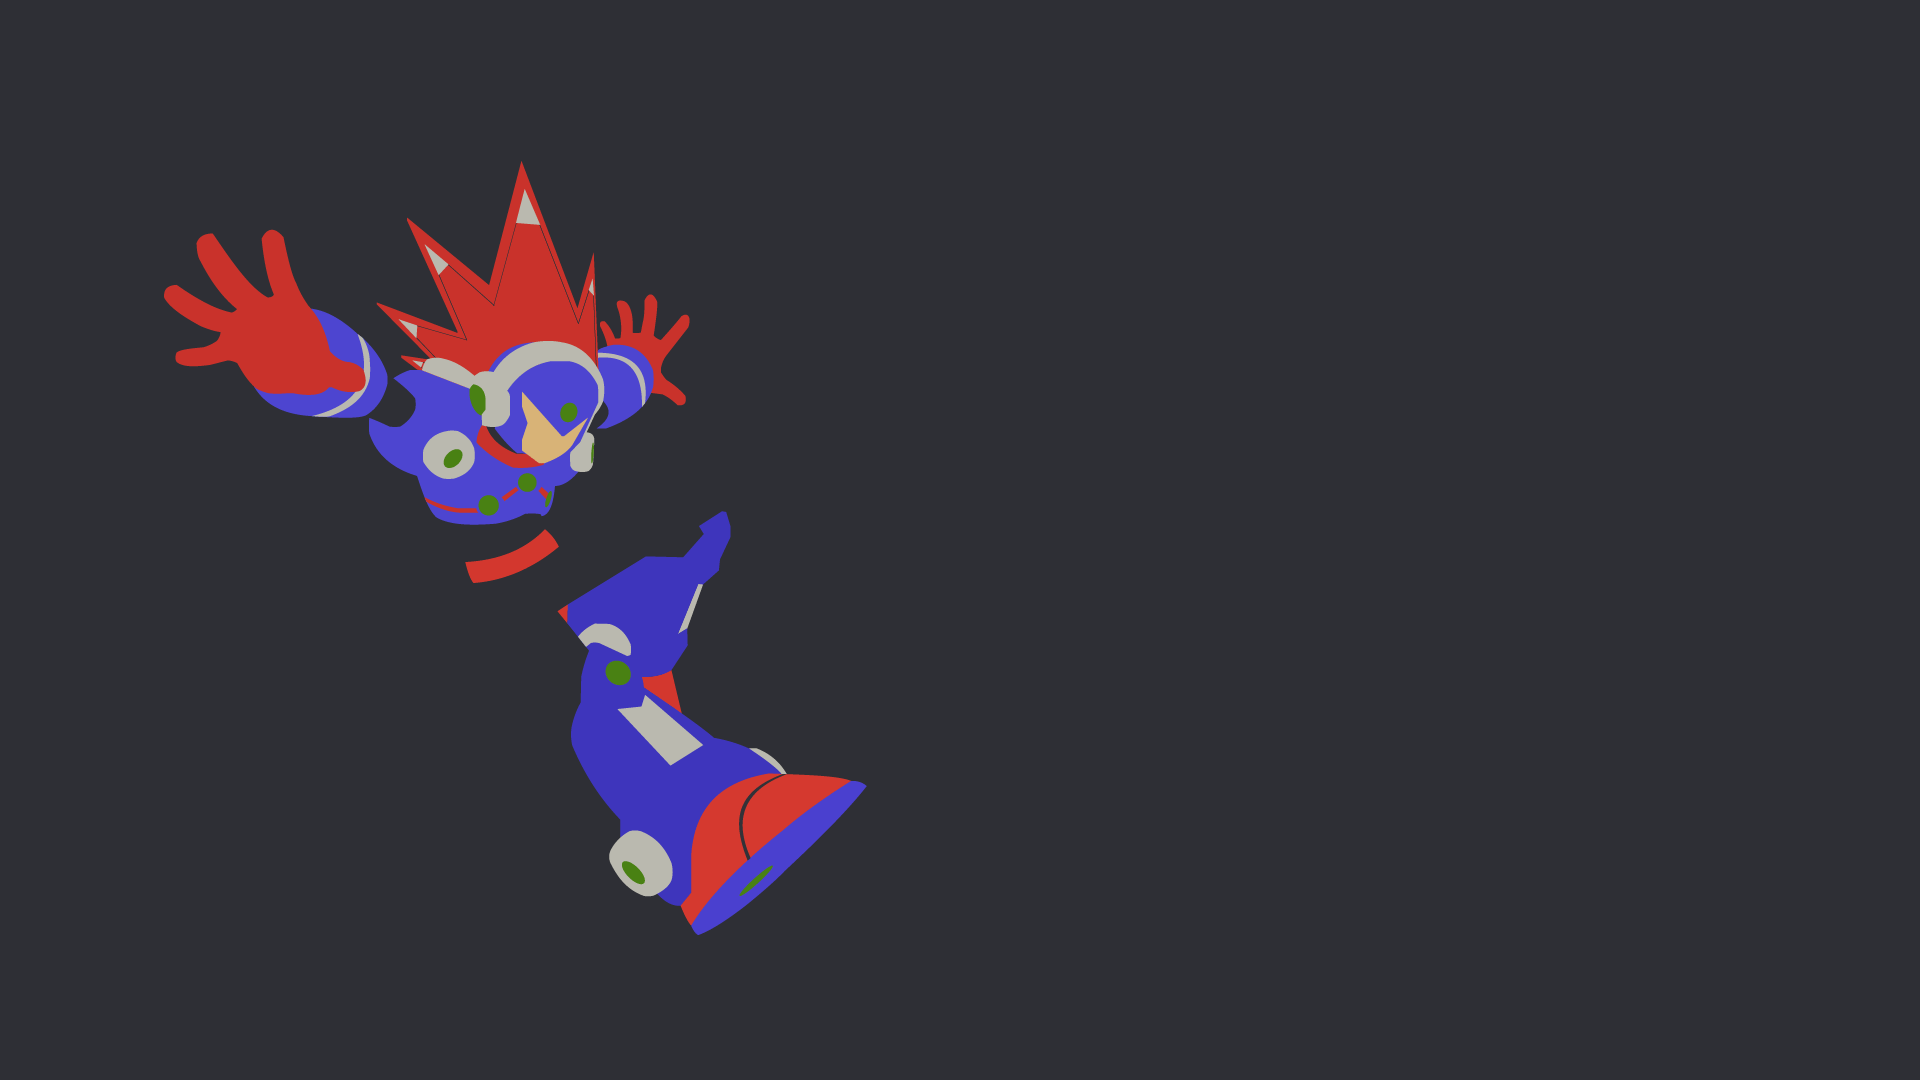 Excited for Mega Man So I Decided to Make a Blast Man Wallpaper